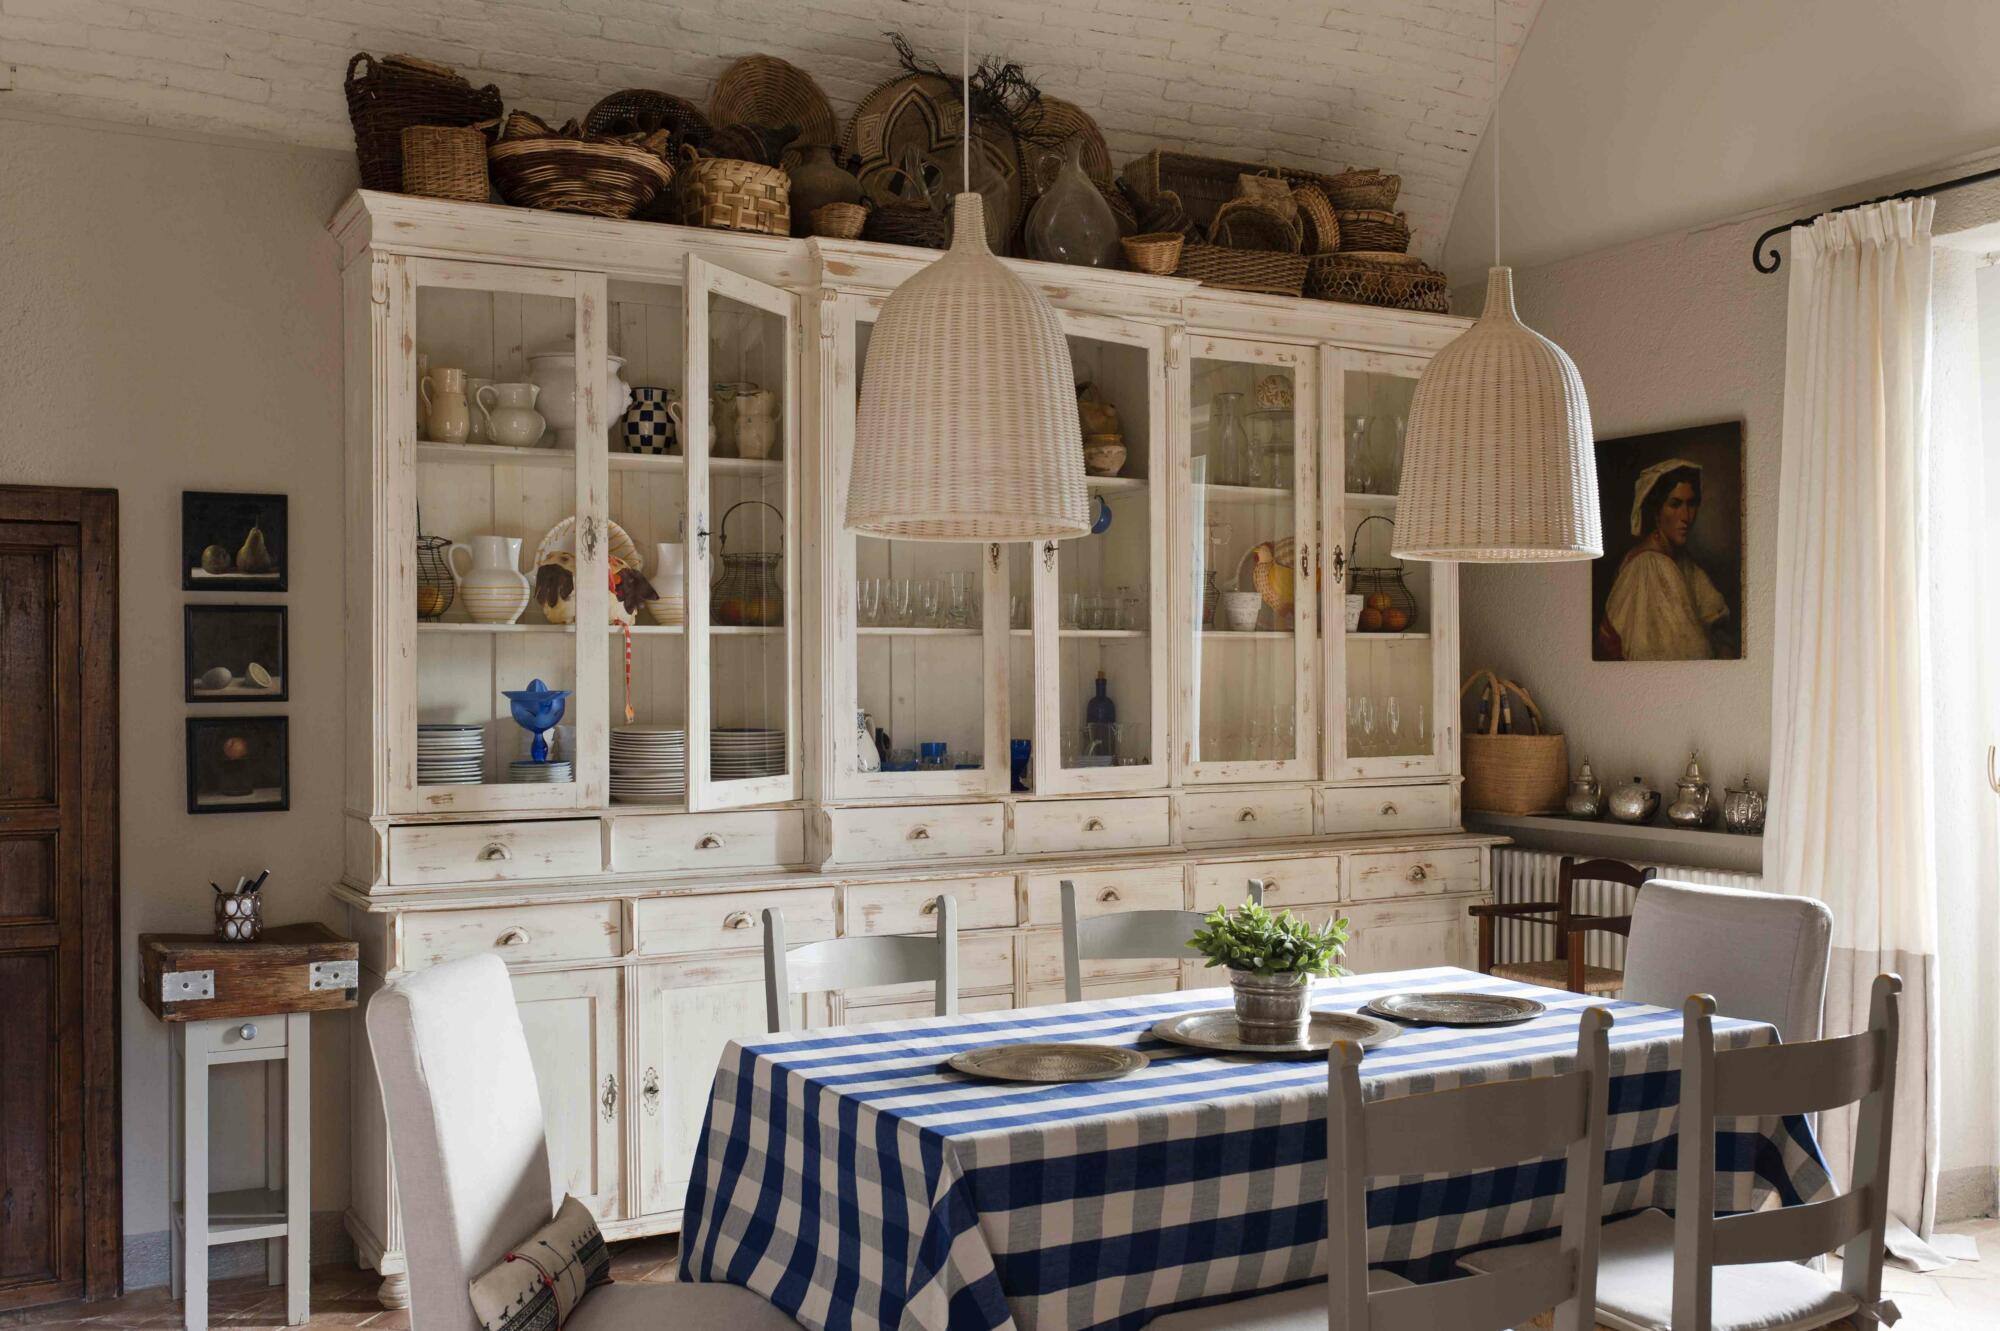 A built-in dining room cabinet with a blue and white checkered tablecloth.